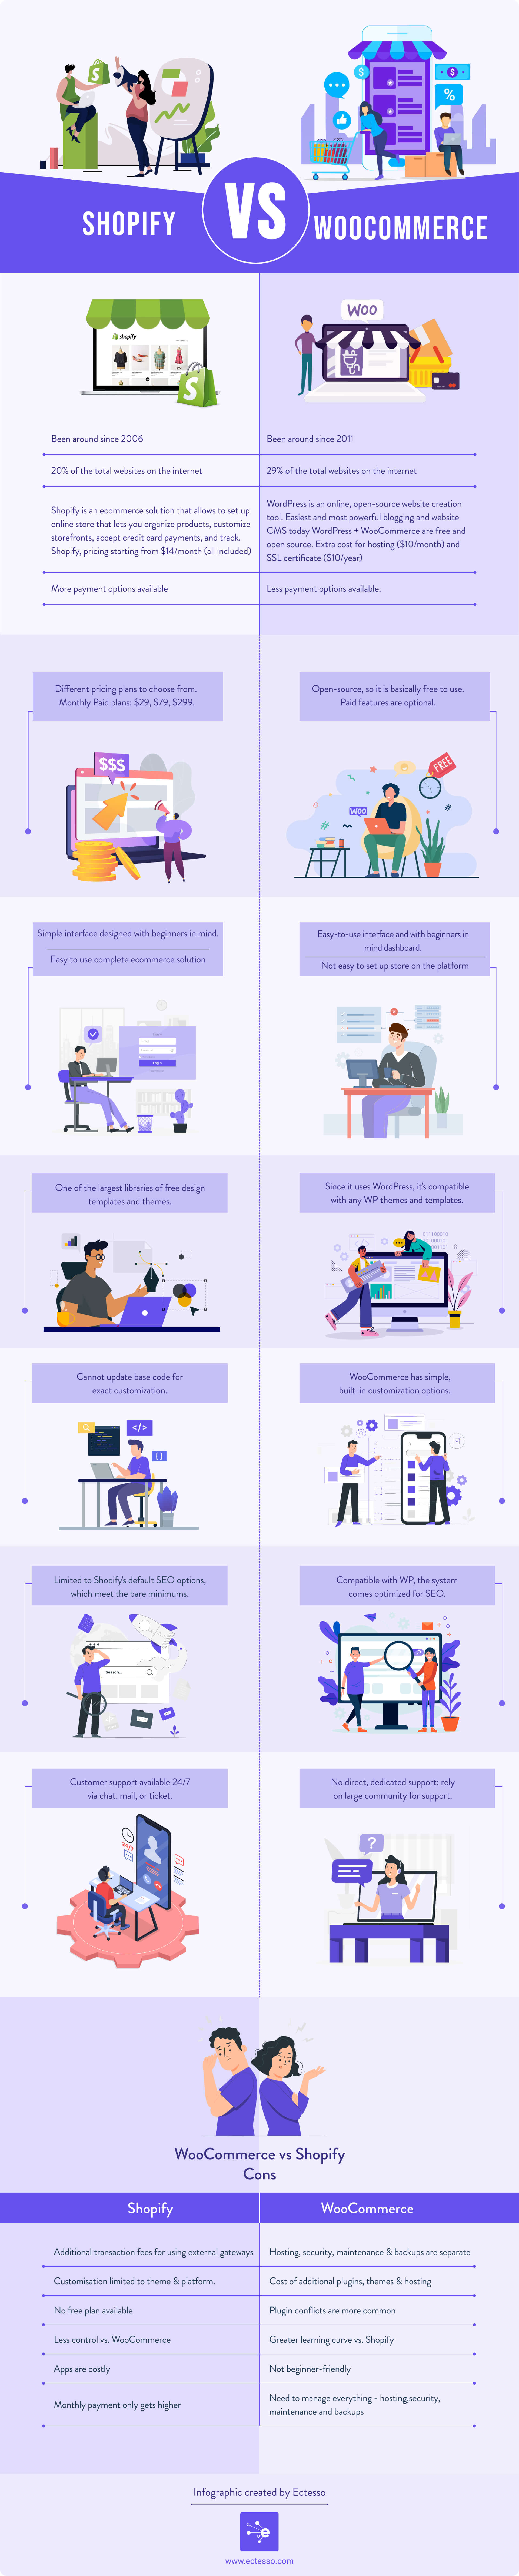 Infographic_ Shopify Vs WooCommerce